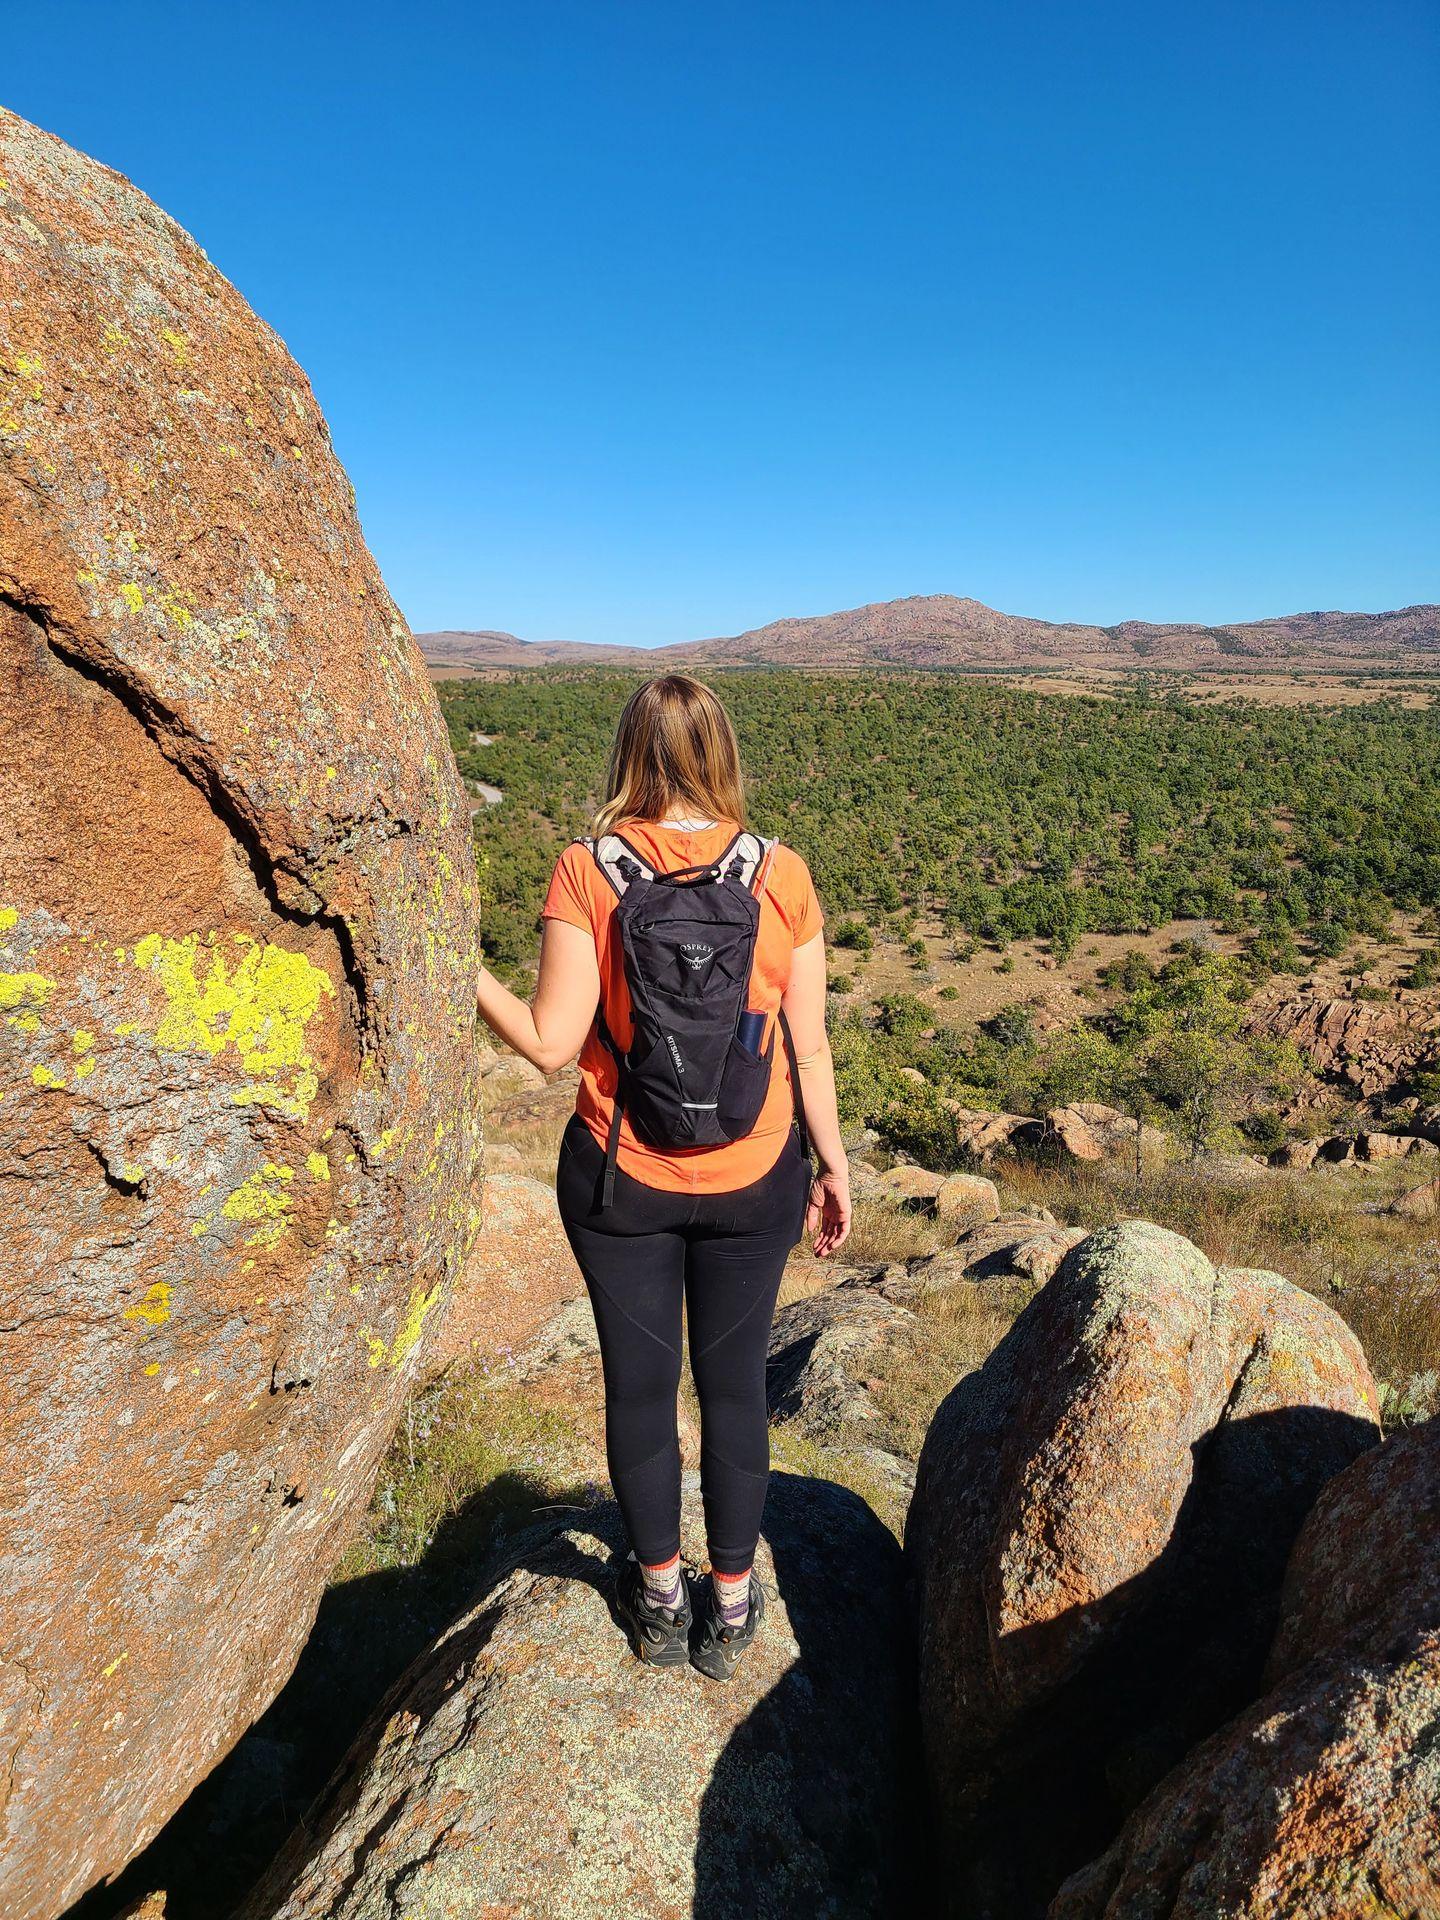 Lydia with her back to the camera looking out at a view on a trail in the Wichita Mountains, Oklahoma.